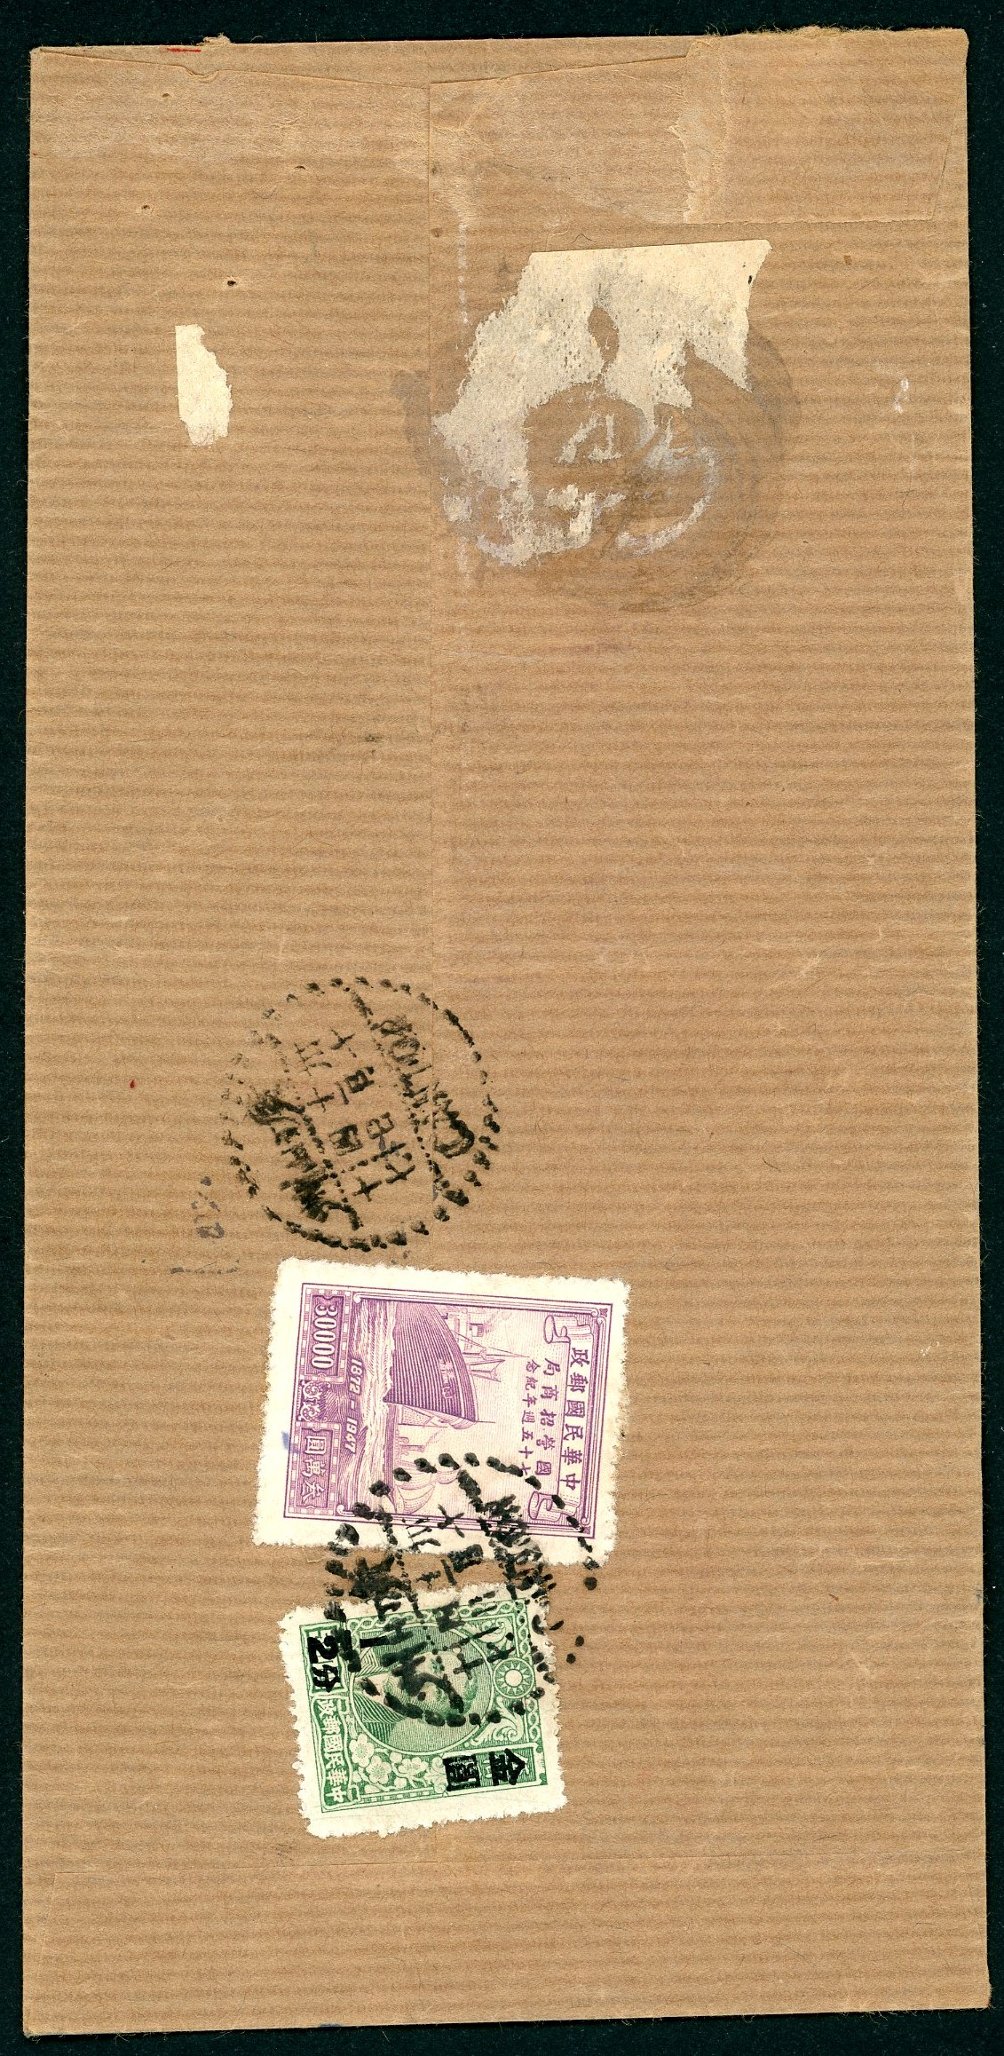 1948 Nov. 4 Canton CNC $30,000 plus GY 1/2c (equivalent to GY 1 1/2c) local registered cover with Scott 801, 821 (2 images)